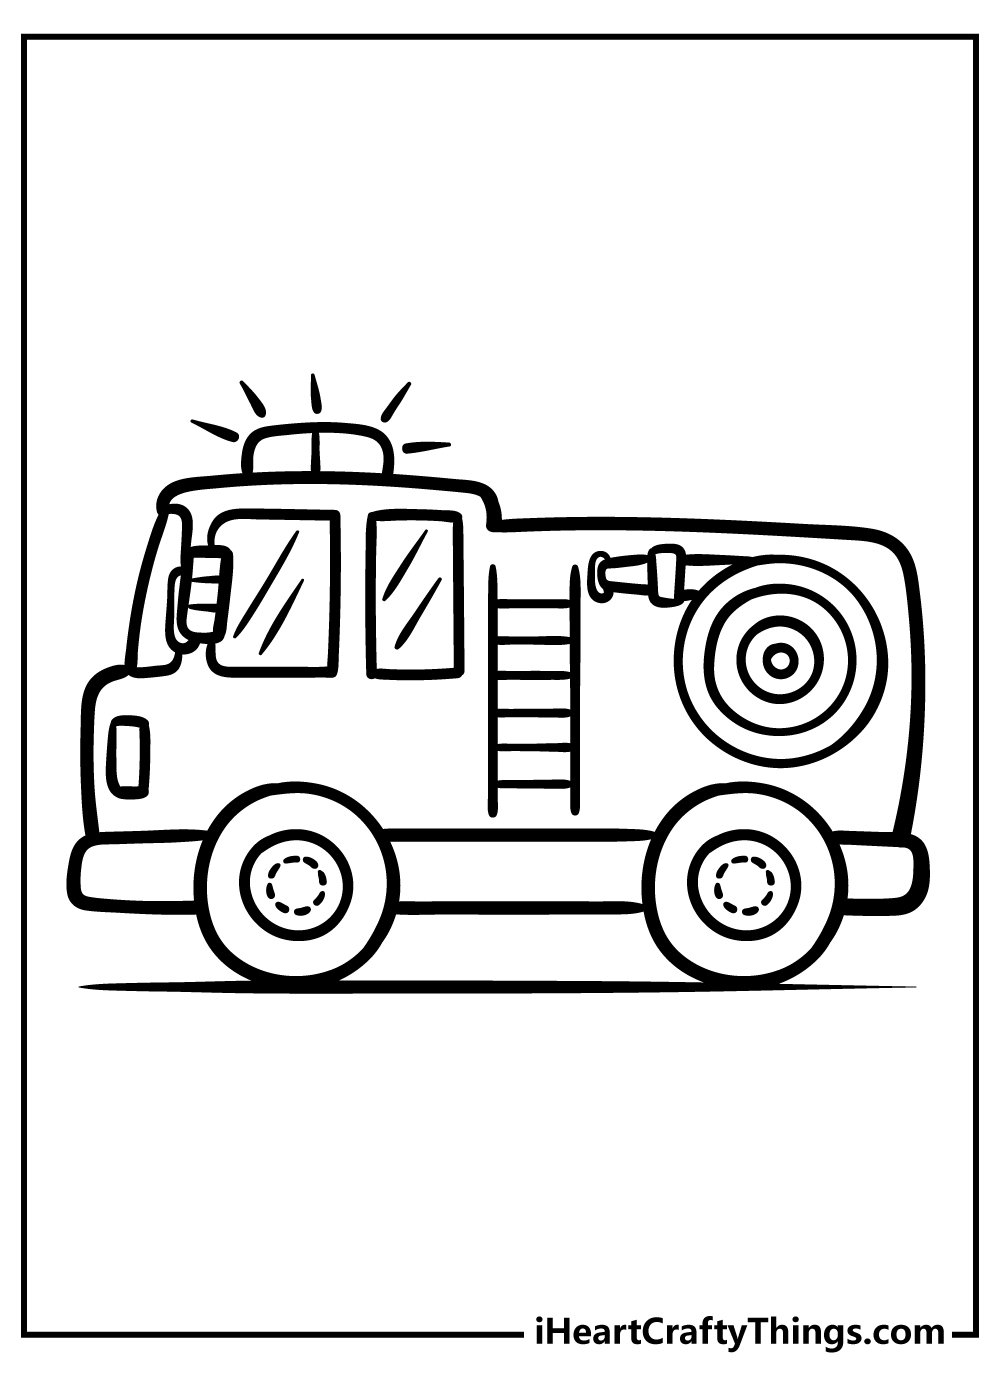 Free Printable Truck Coloring Pages For Kids Trucks Coloring Pages 